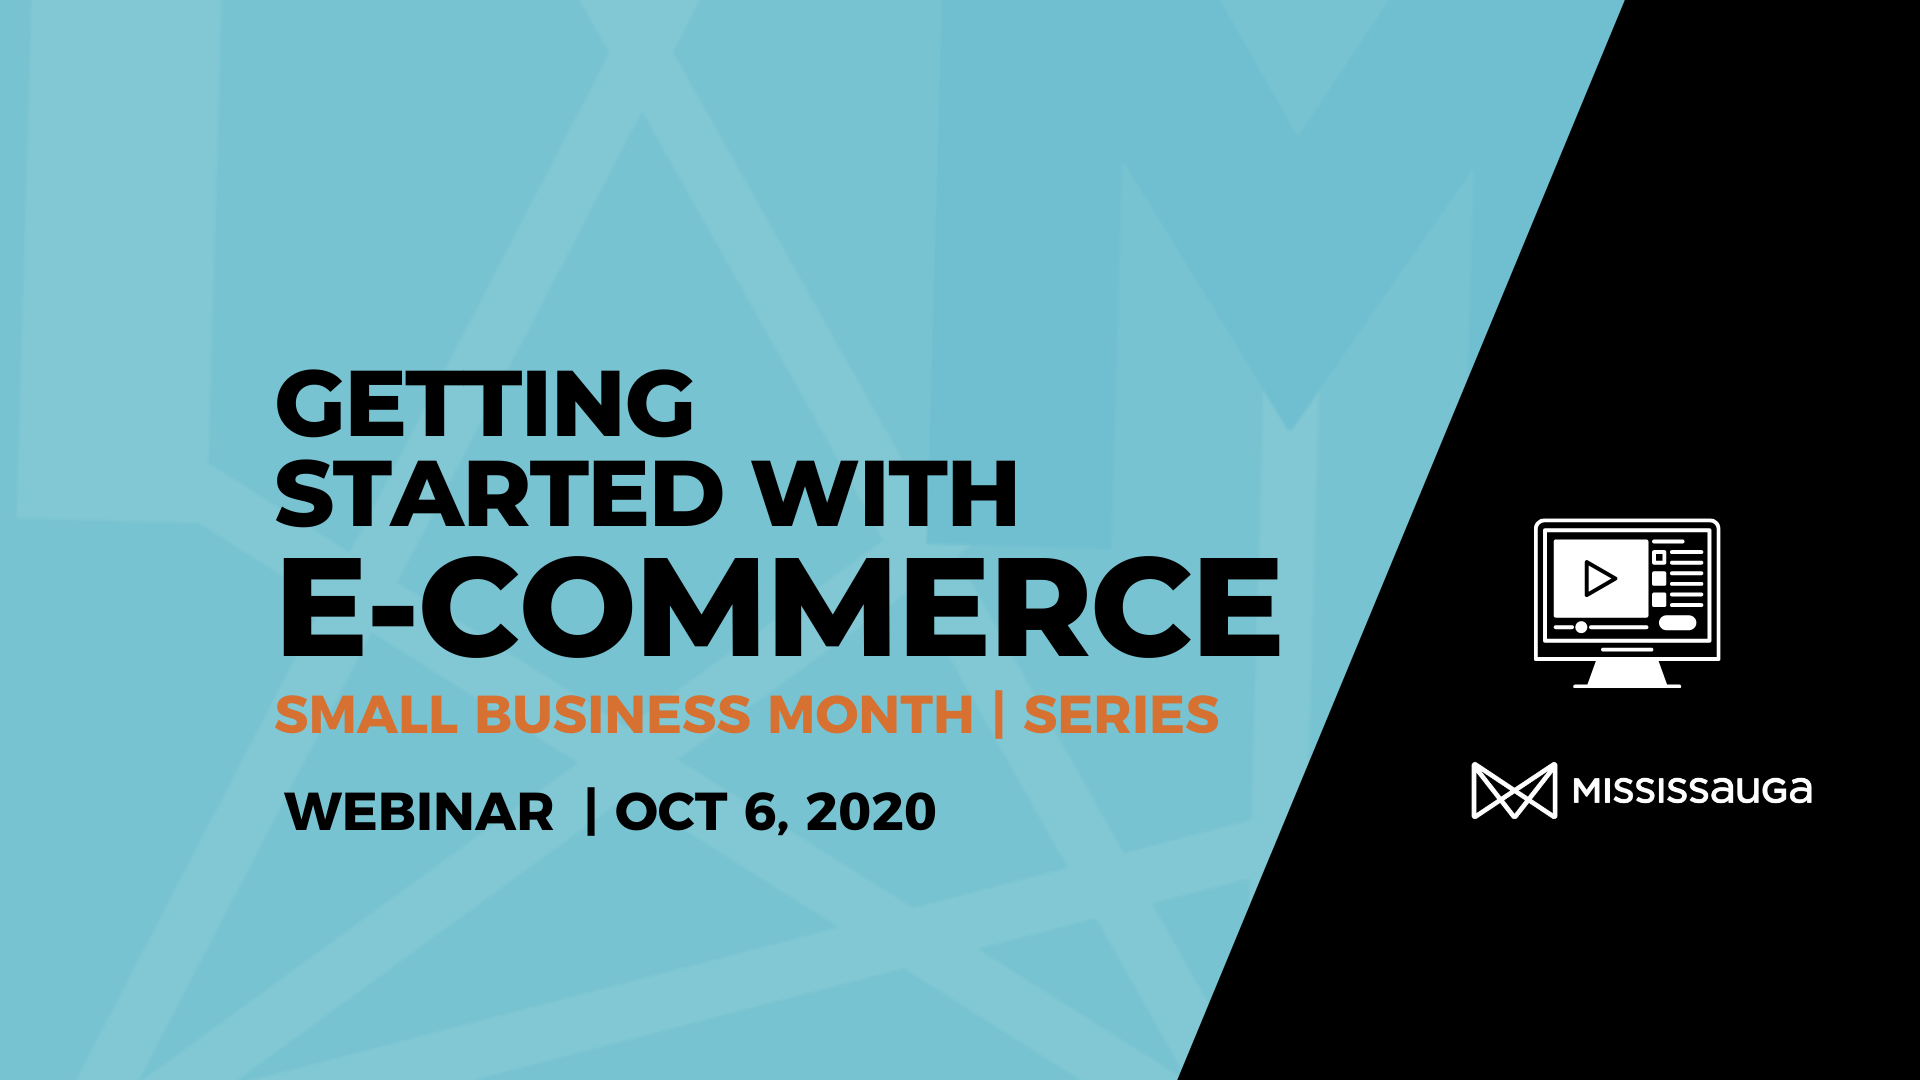 Getting Started with E-Commerce – Webinar, Oct 6